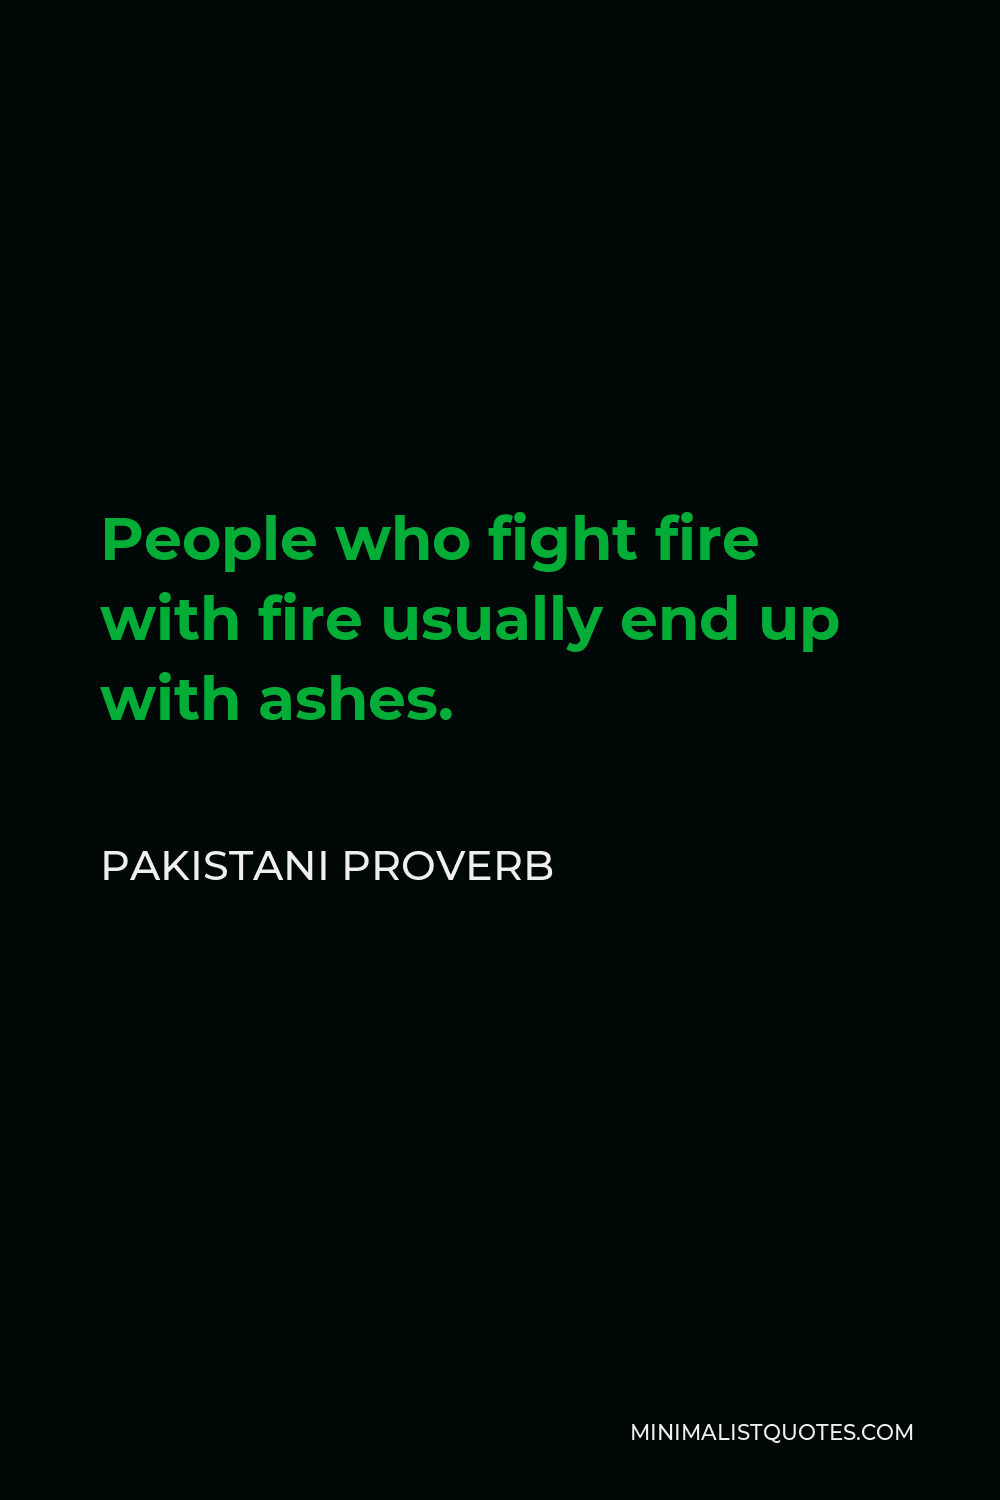 Pakistani Proverb Quote - People who fight fire with fire usually end up with ashes.